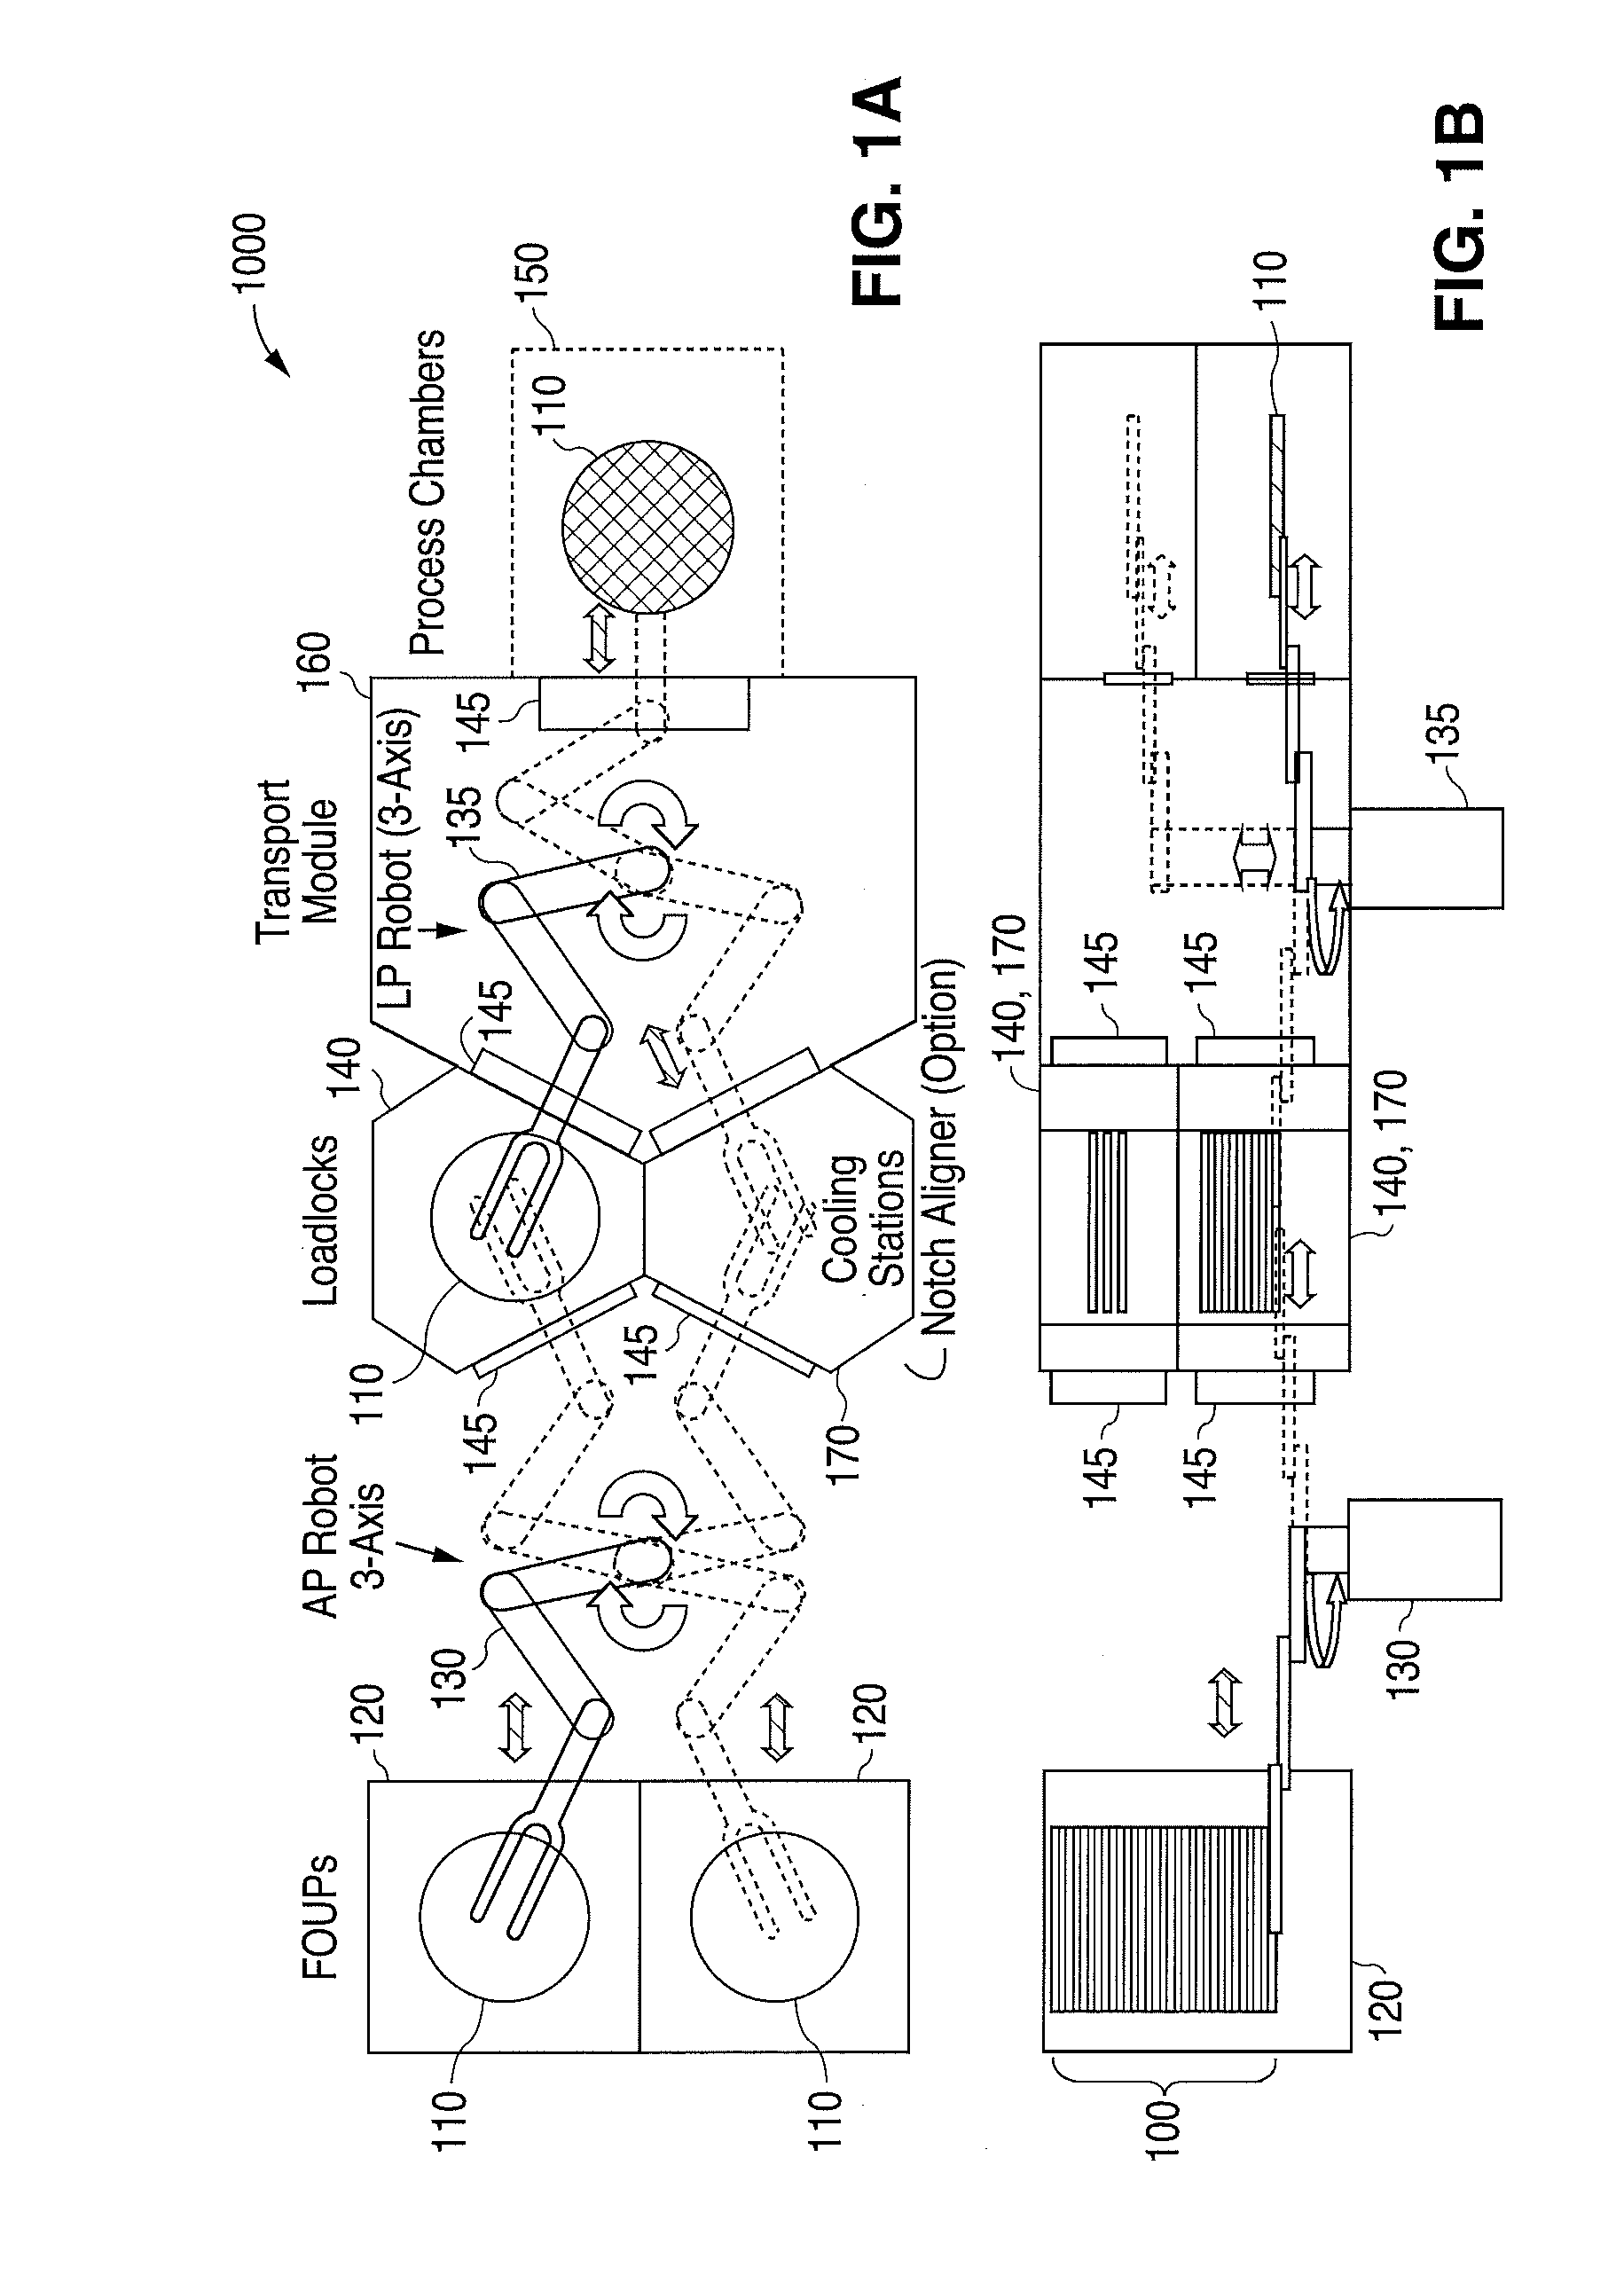 In-line wafer robotic processing system